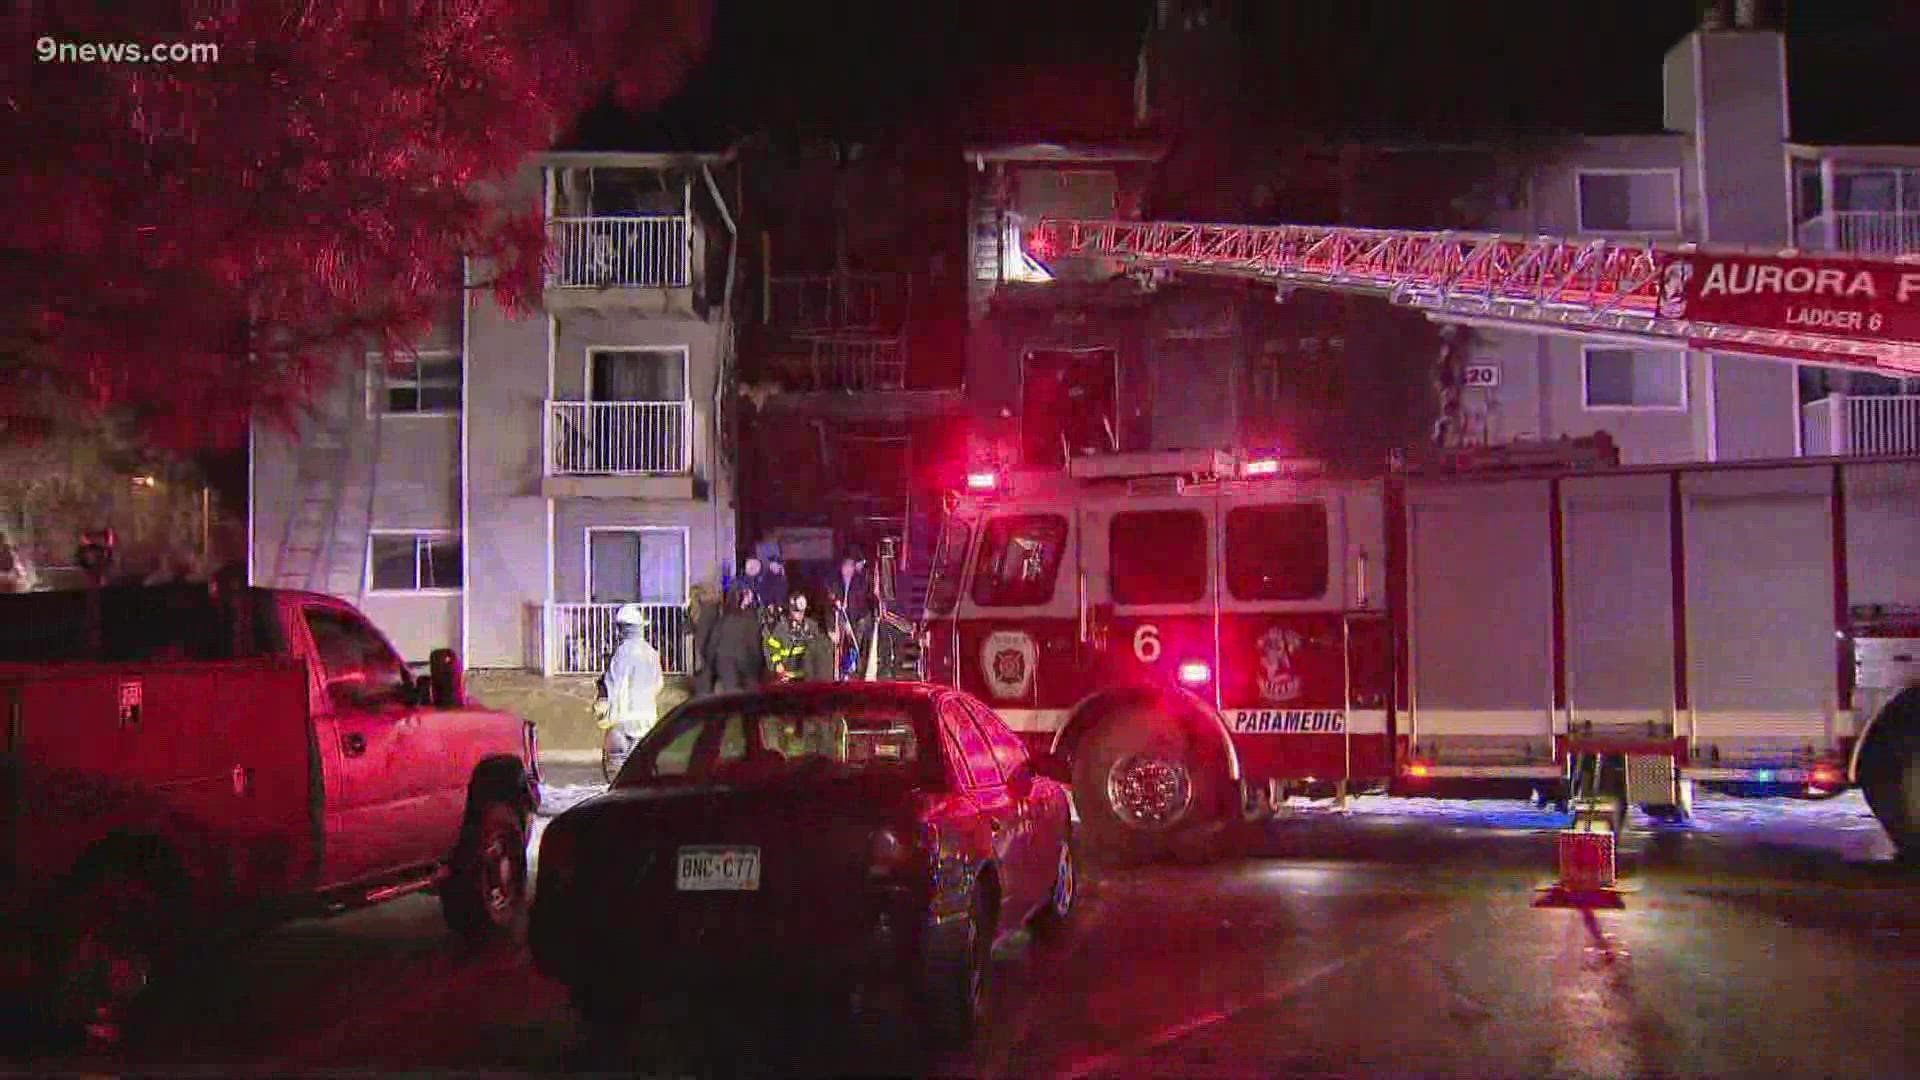 Aurora Fire Rescue is investigating an apartment fire that left a child dead Monday morning.